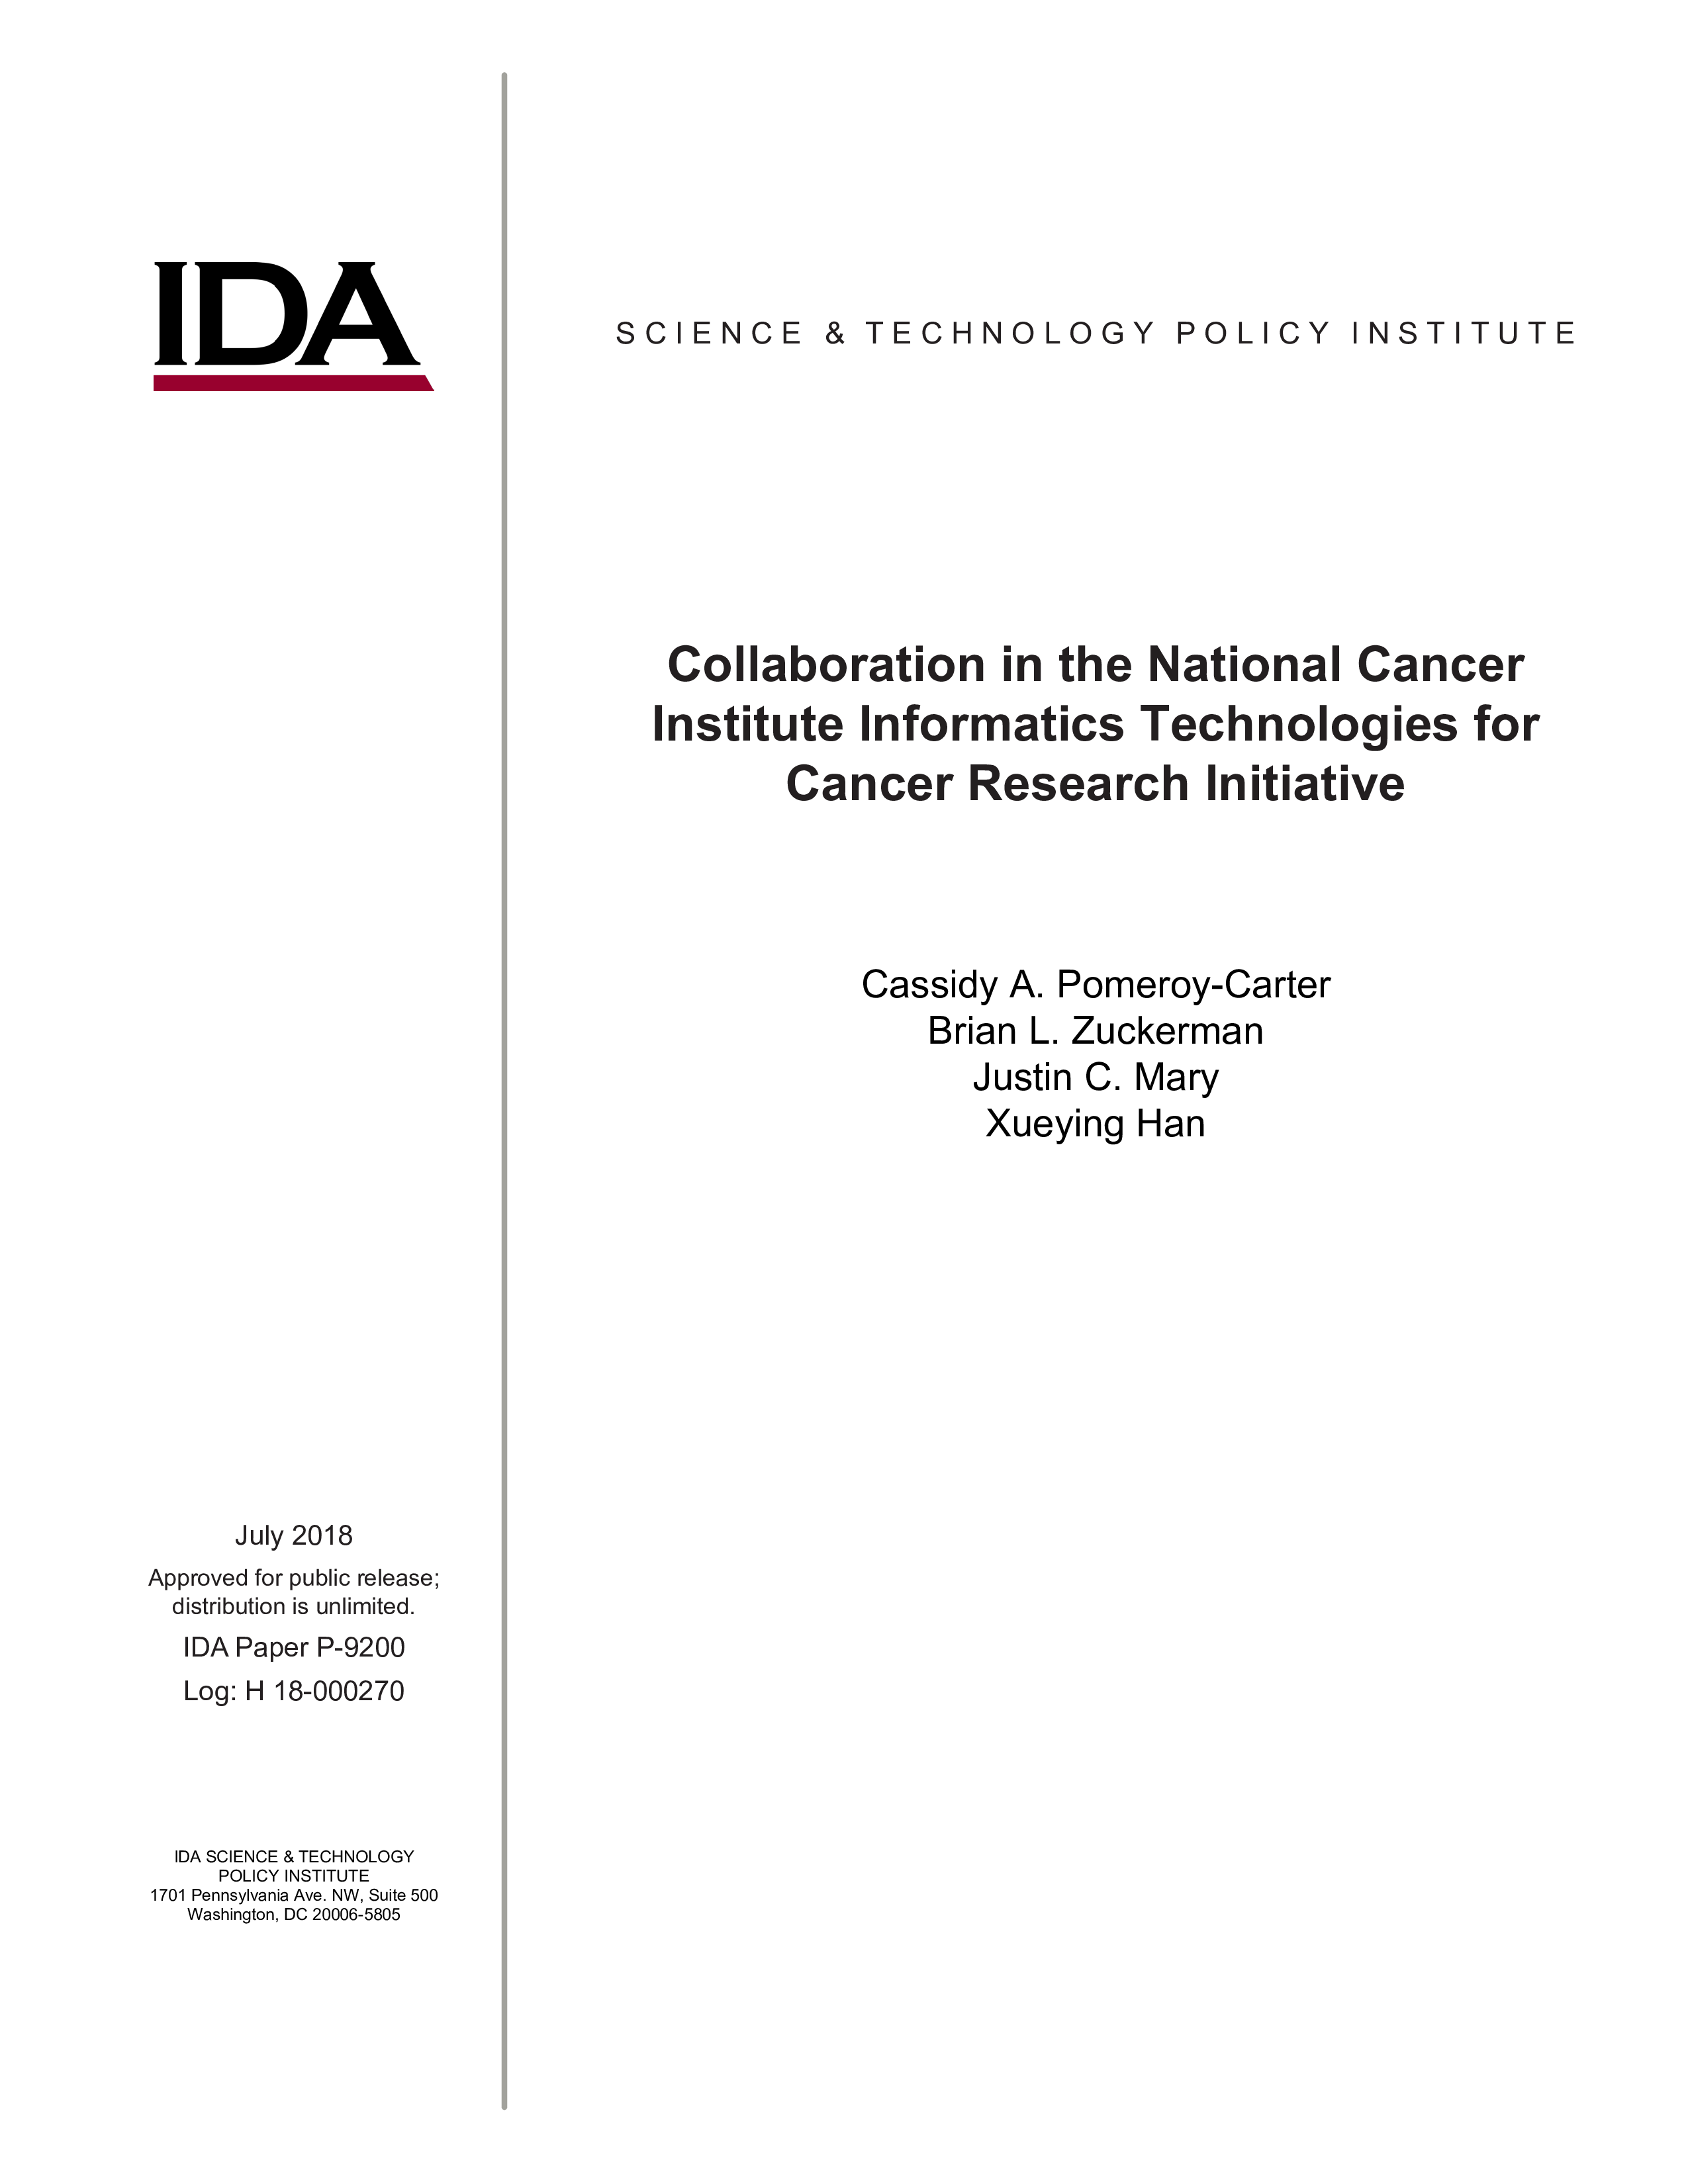 Collaboration in the National Cancer Institute (NCI) Informatics Technologies for Cancer Research (ITCR) Initiative 